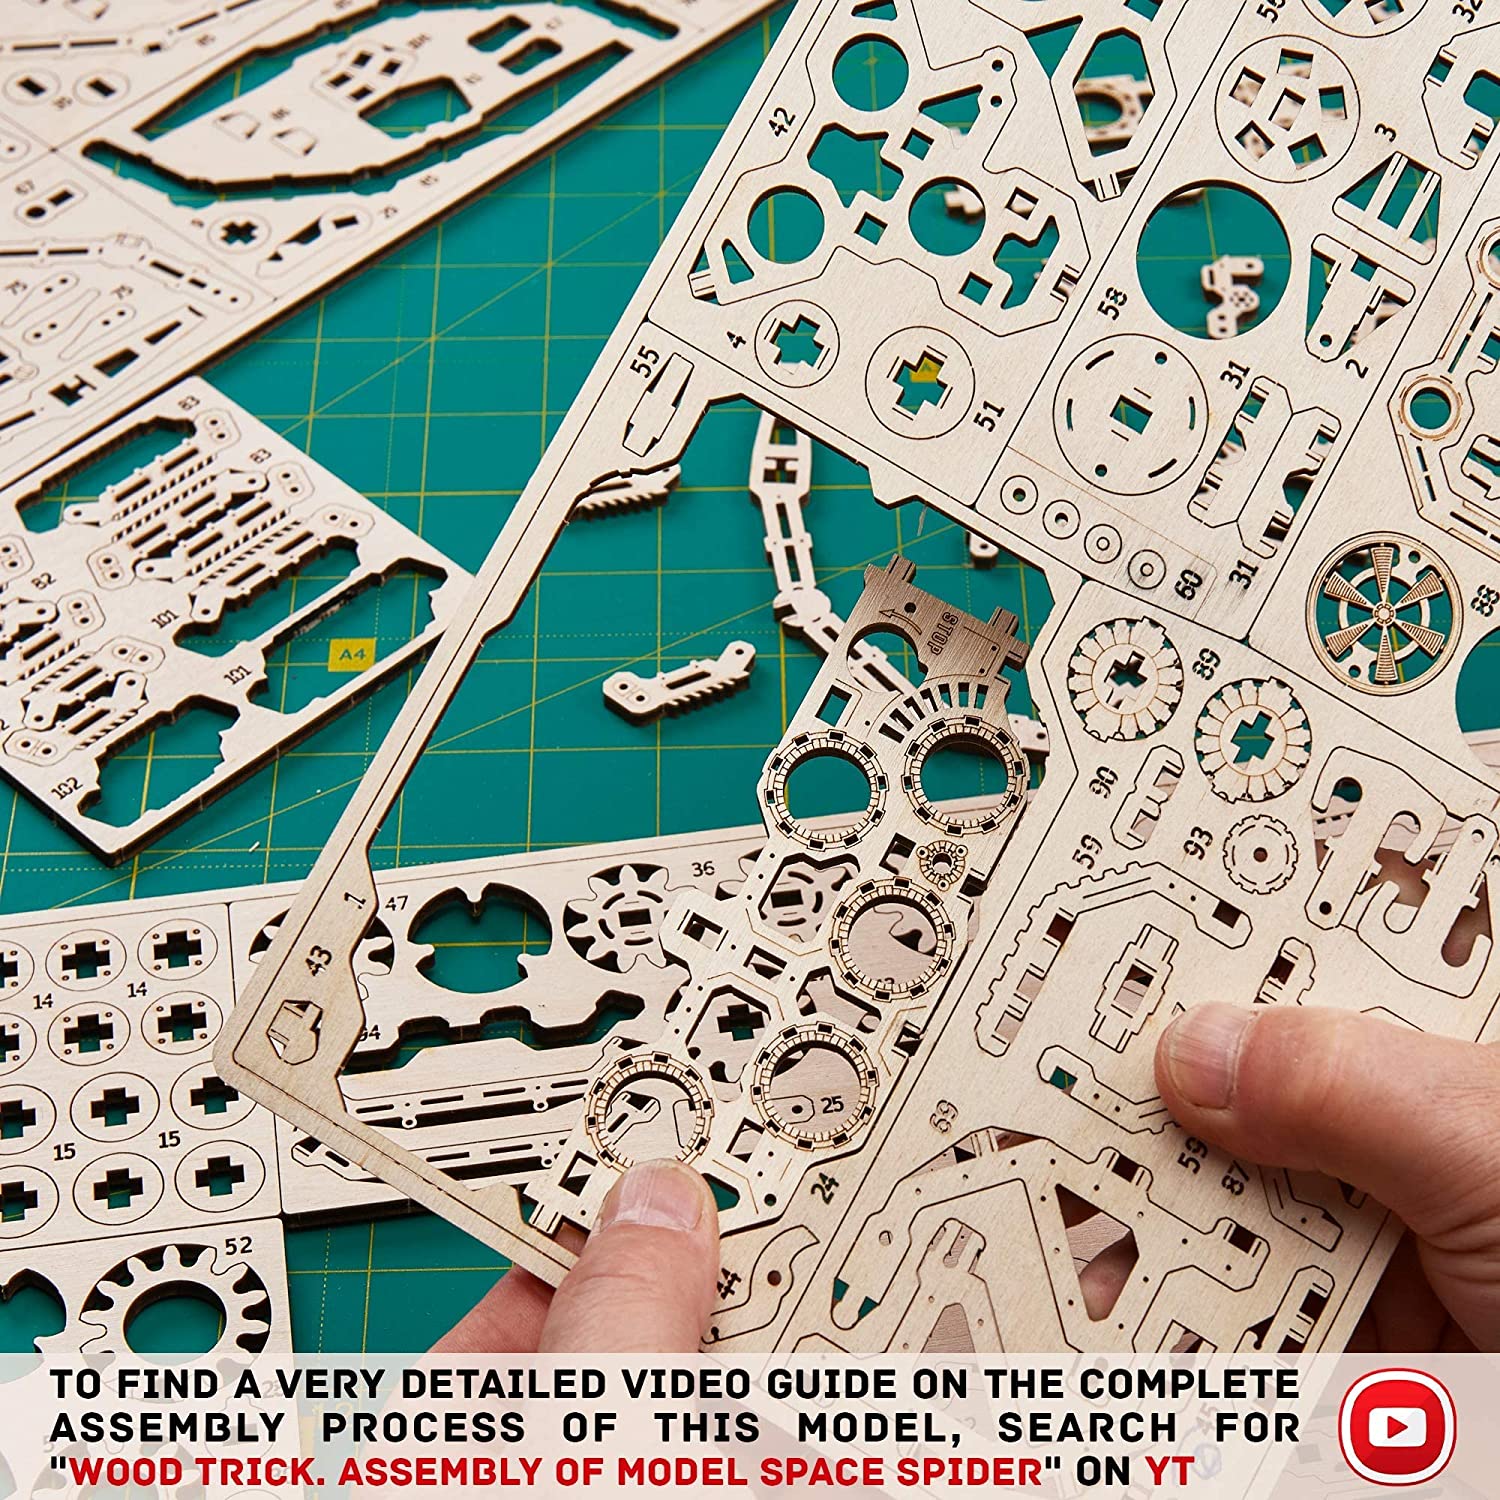 A pair of hands are removing wooden pieces from a 3D wooden spider puzzle kit.